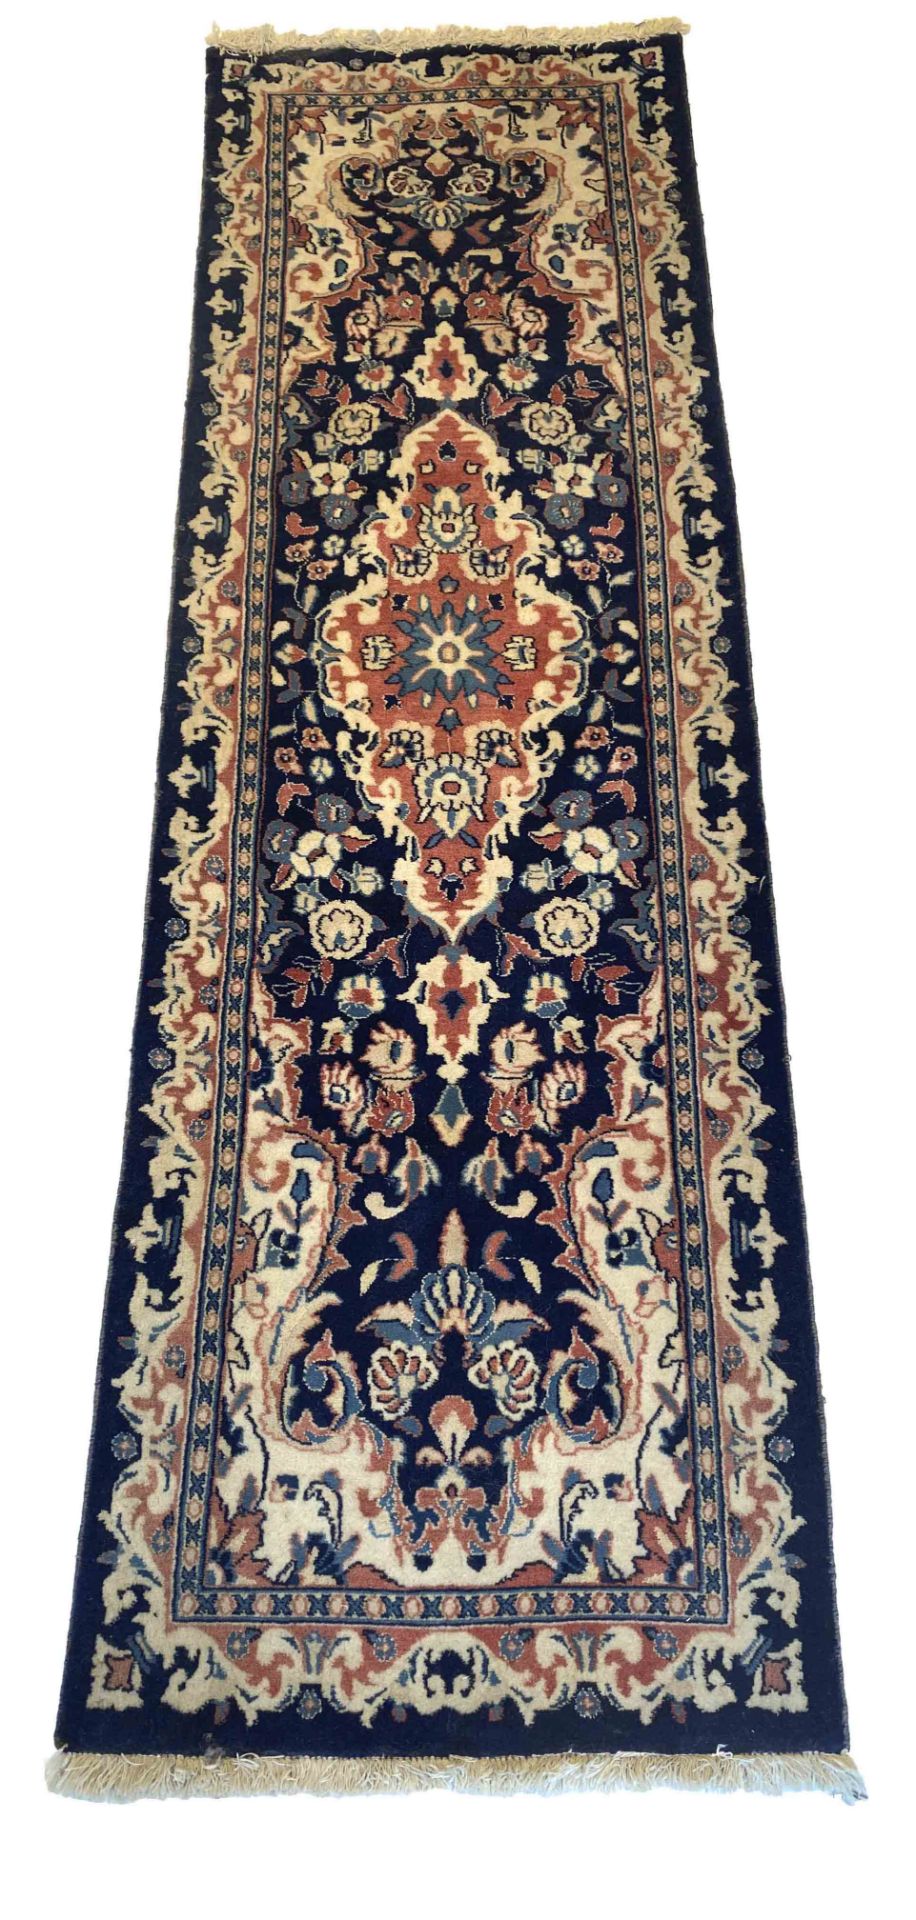 Carpet, Kashmar, runner, good condition with minor wear, 195 x 61 cm - The carpet can only be viewed